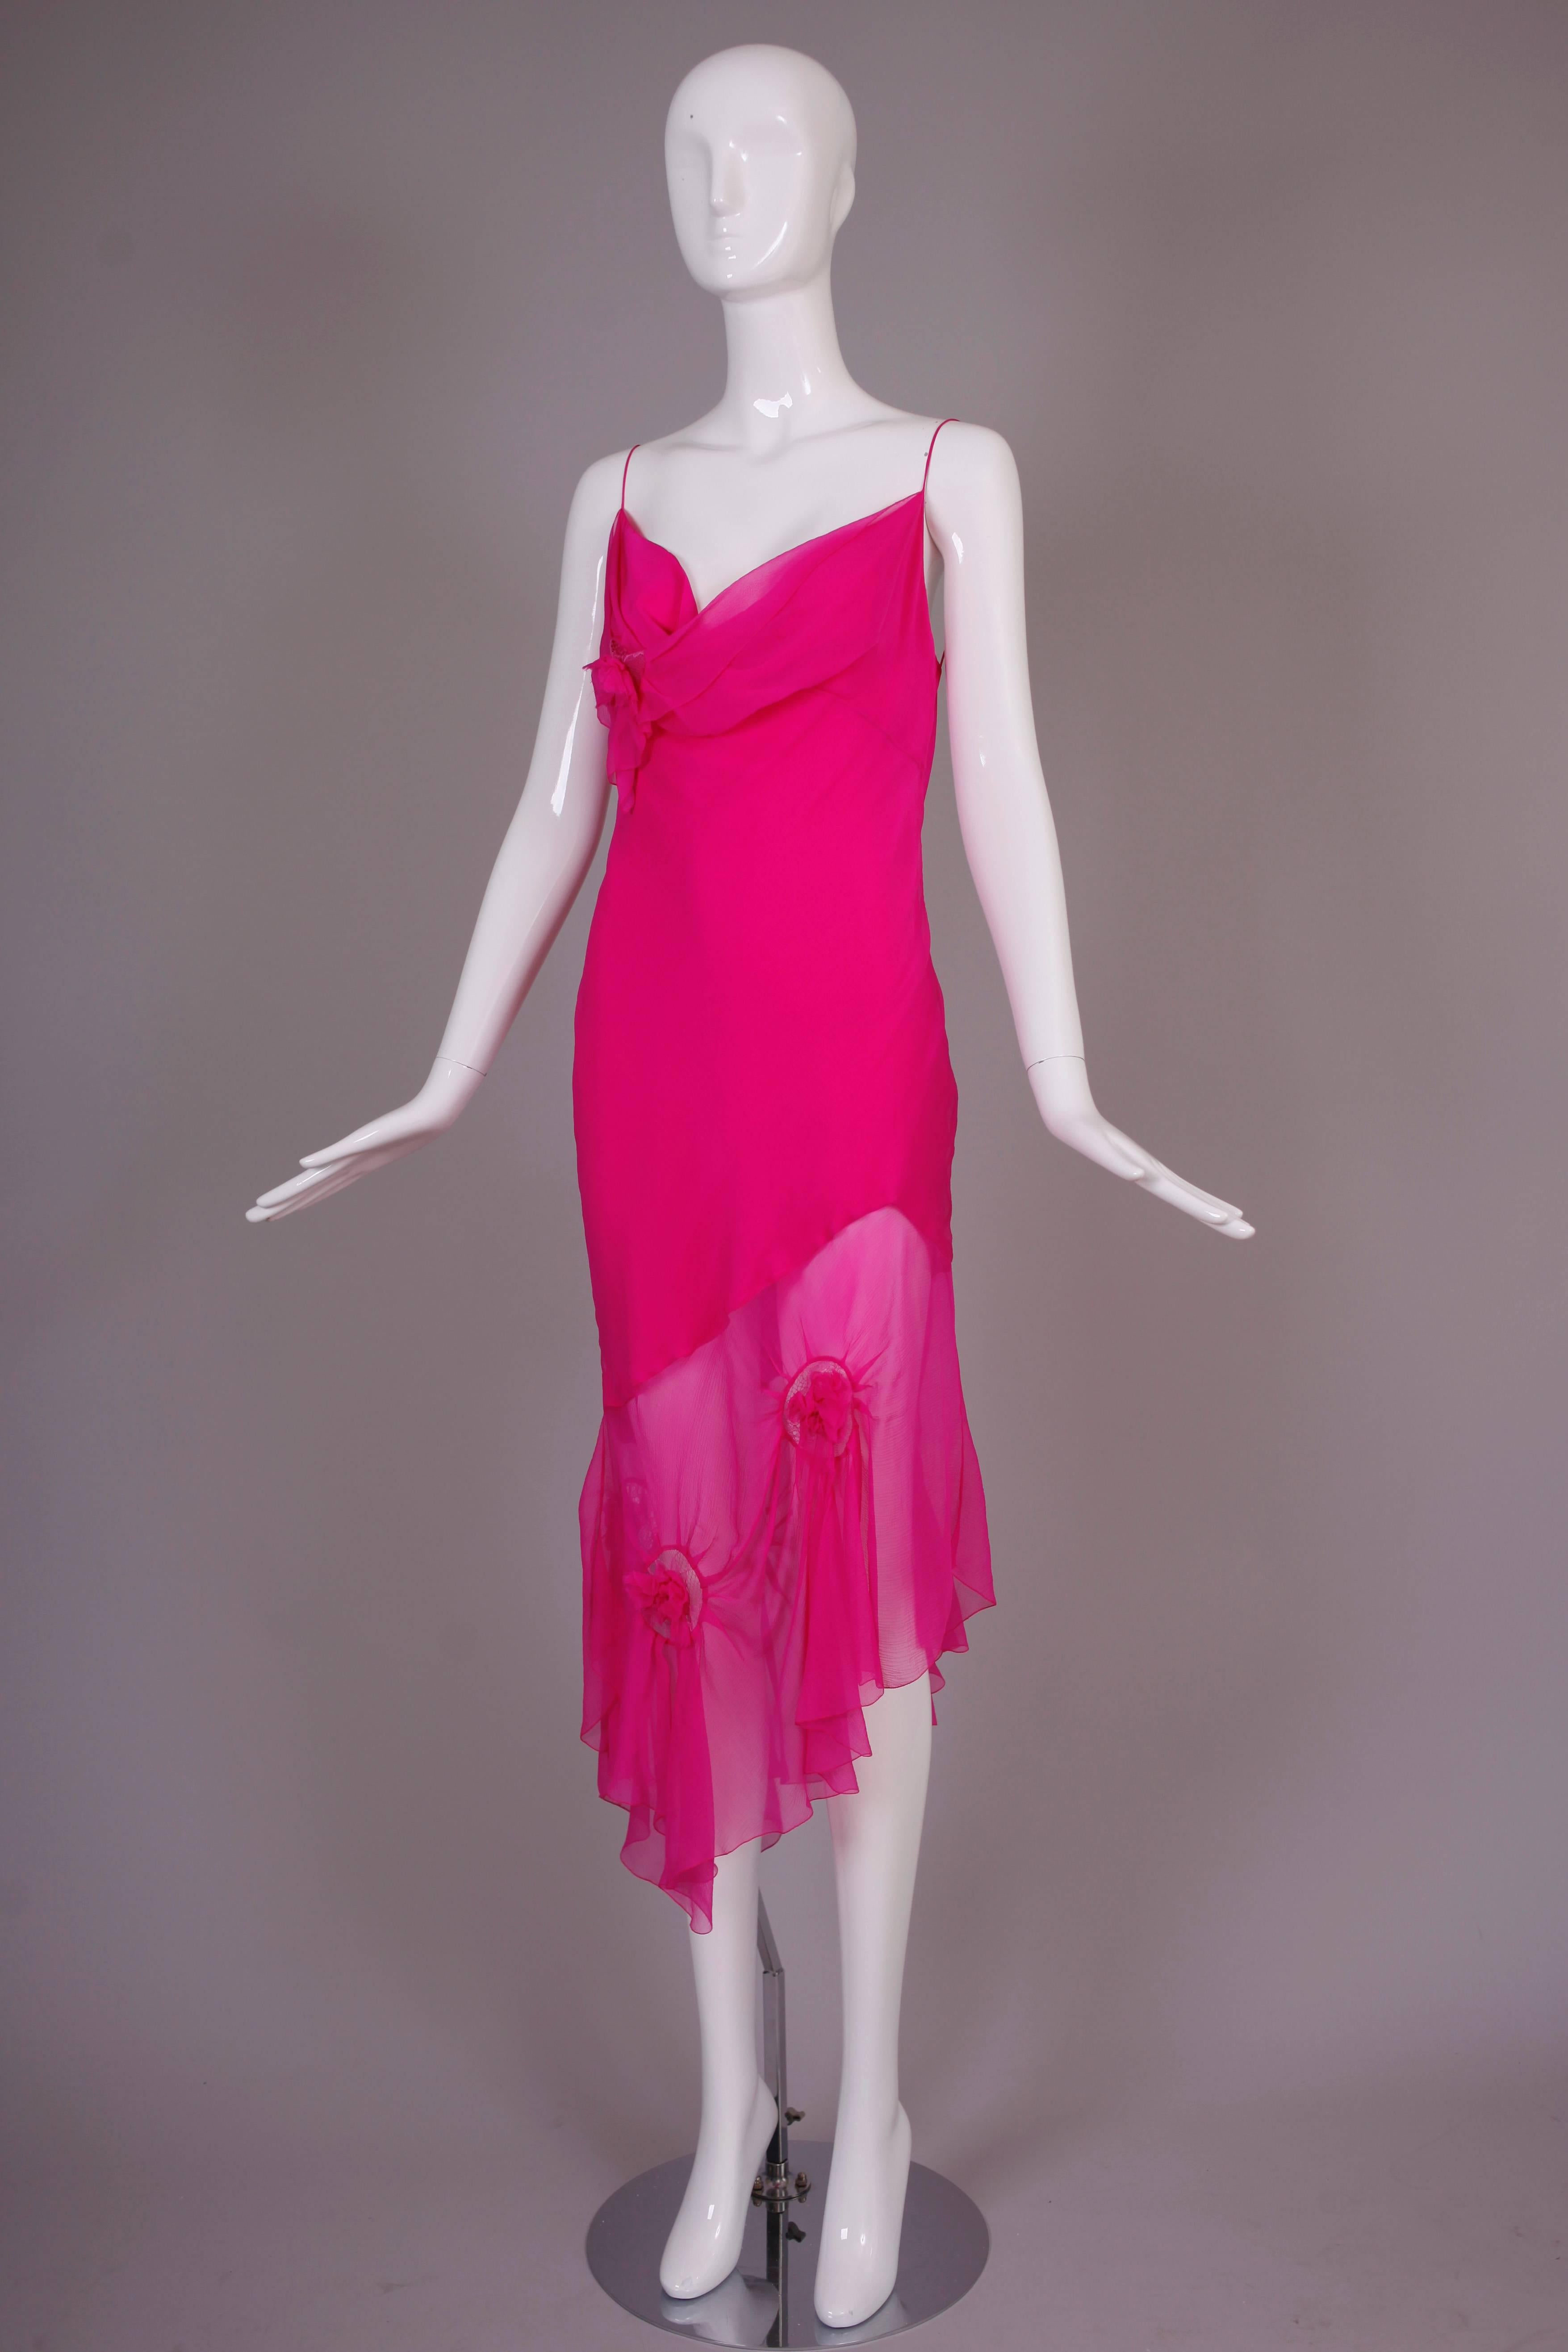 Circa 2000 John Galliano for Christian Dior shocking pink silk chiffon draped cocktail dress w/ puckered rosettes at the hem. In excellent condition. Size tag 8 - please see measurements.
MEASUREMENTS:
Bust - (approx.) 34